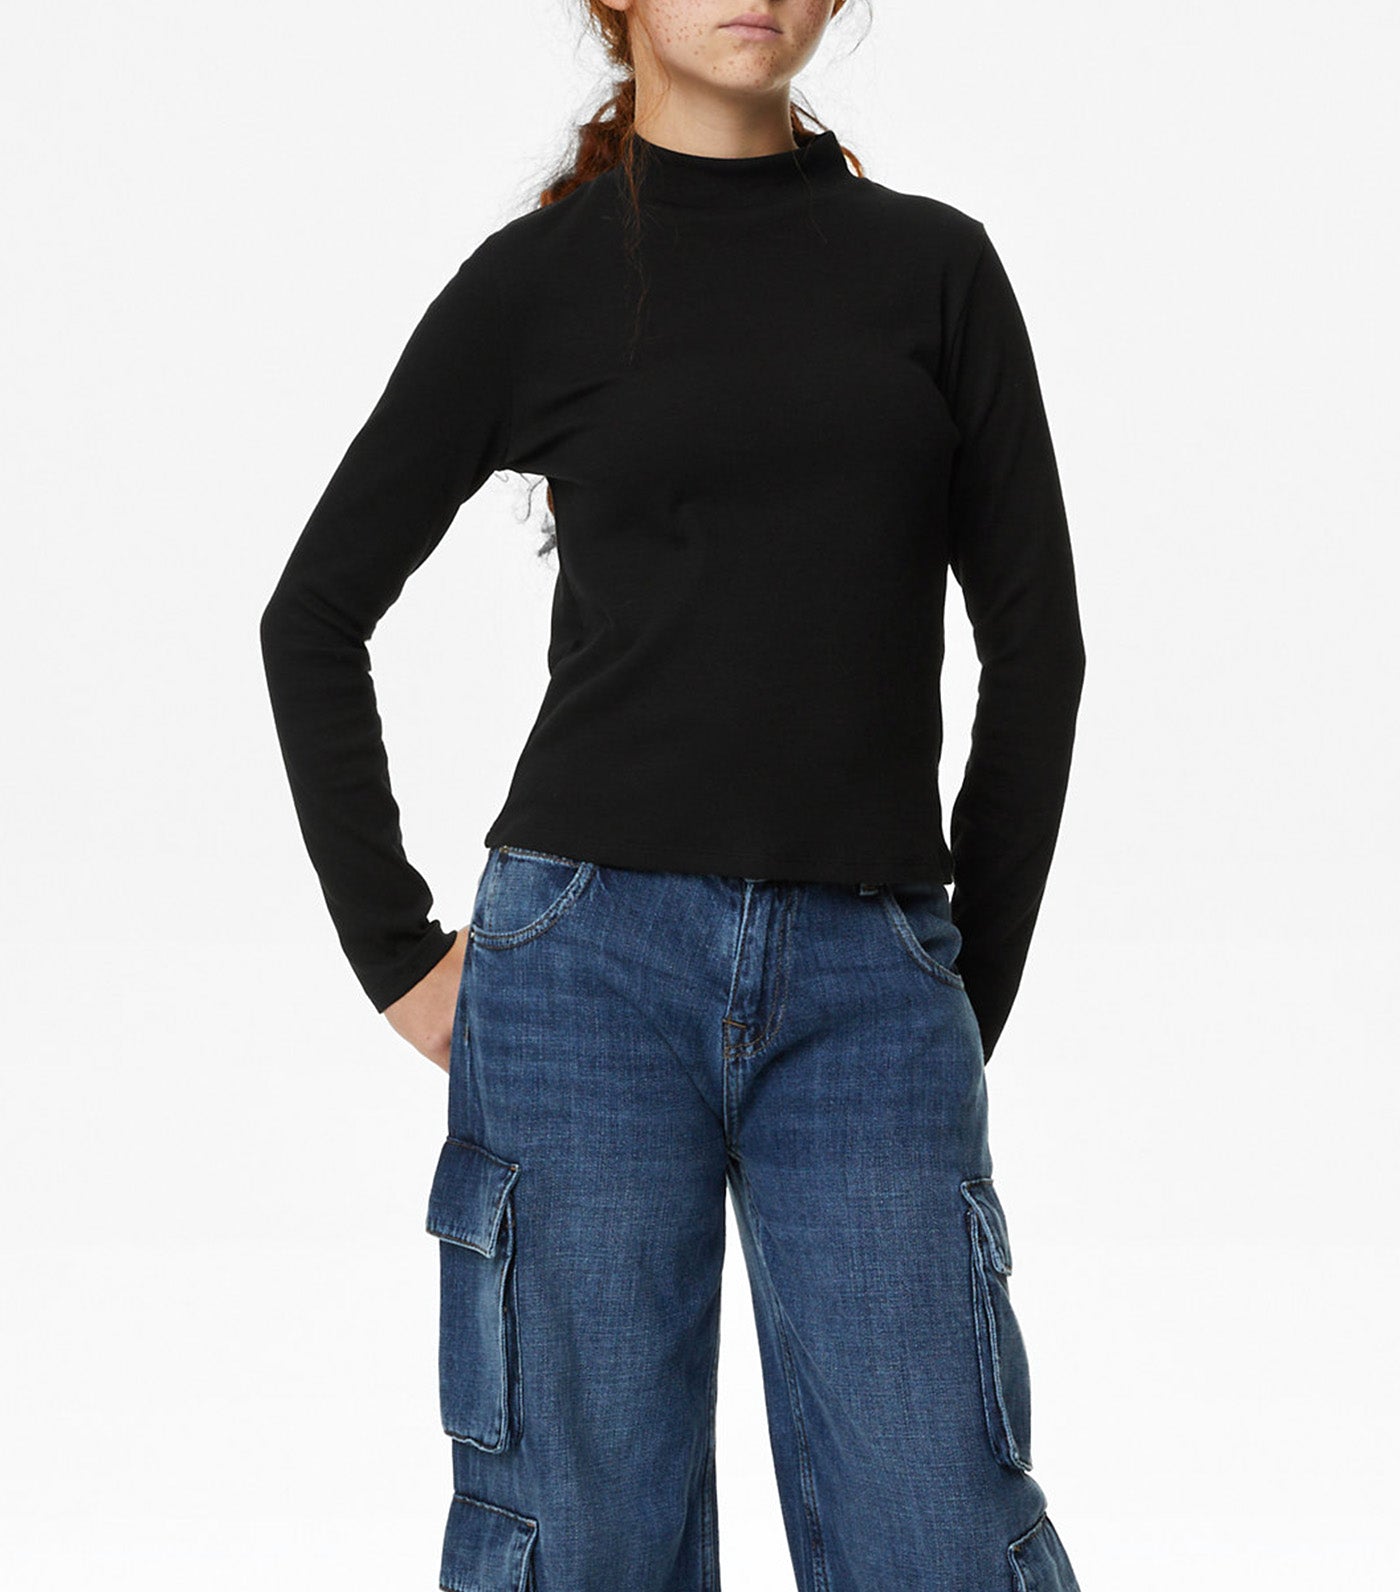 Cotton Rich Ribbed Top Black